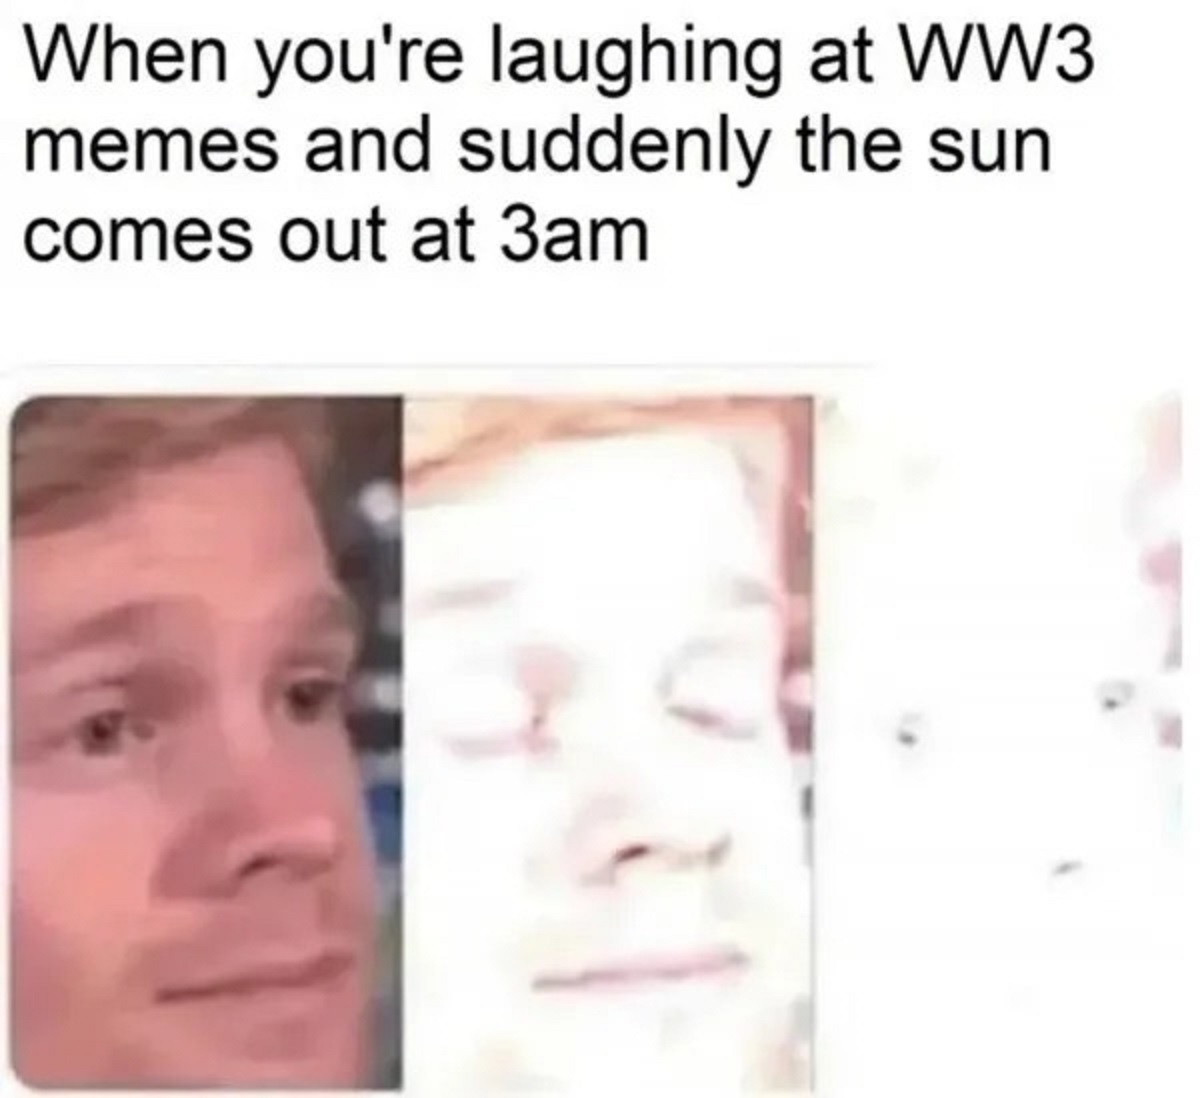 sun comes out at 9pm meme - When you're laughing at WW3 memes and suddenly the sun comes out at 3am